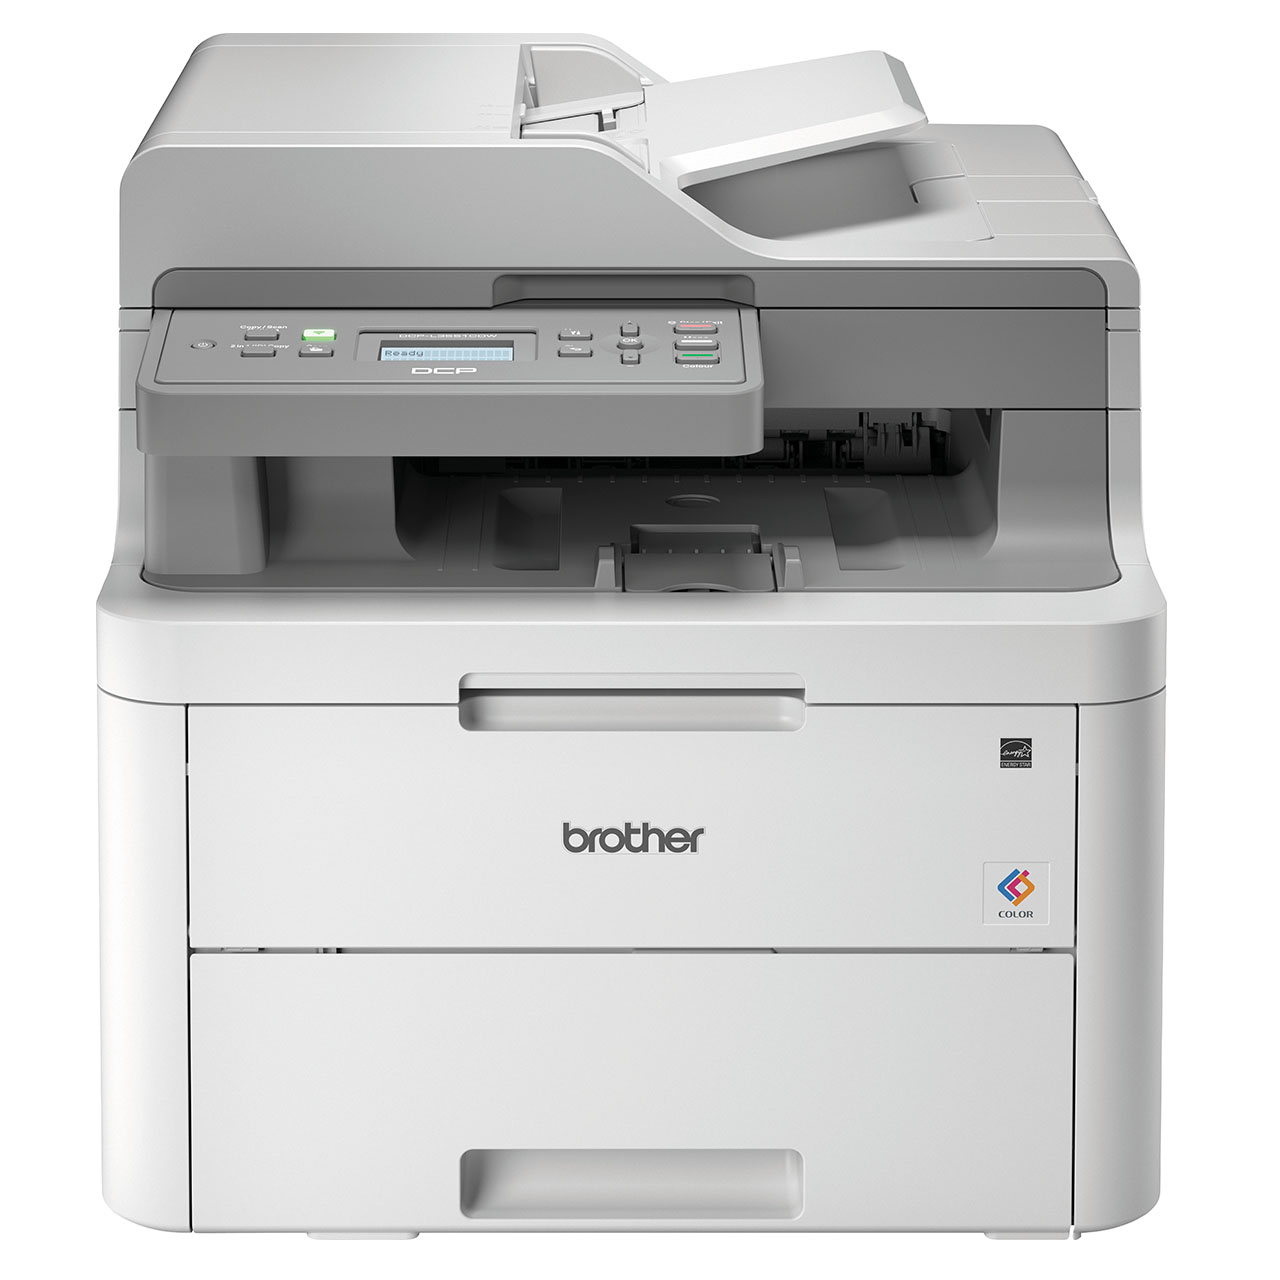 Brother DCP-L3551CDW Colour LED Wireless 3-in-1 Multifunction printer with duplex print (8CE77C00141)